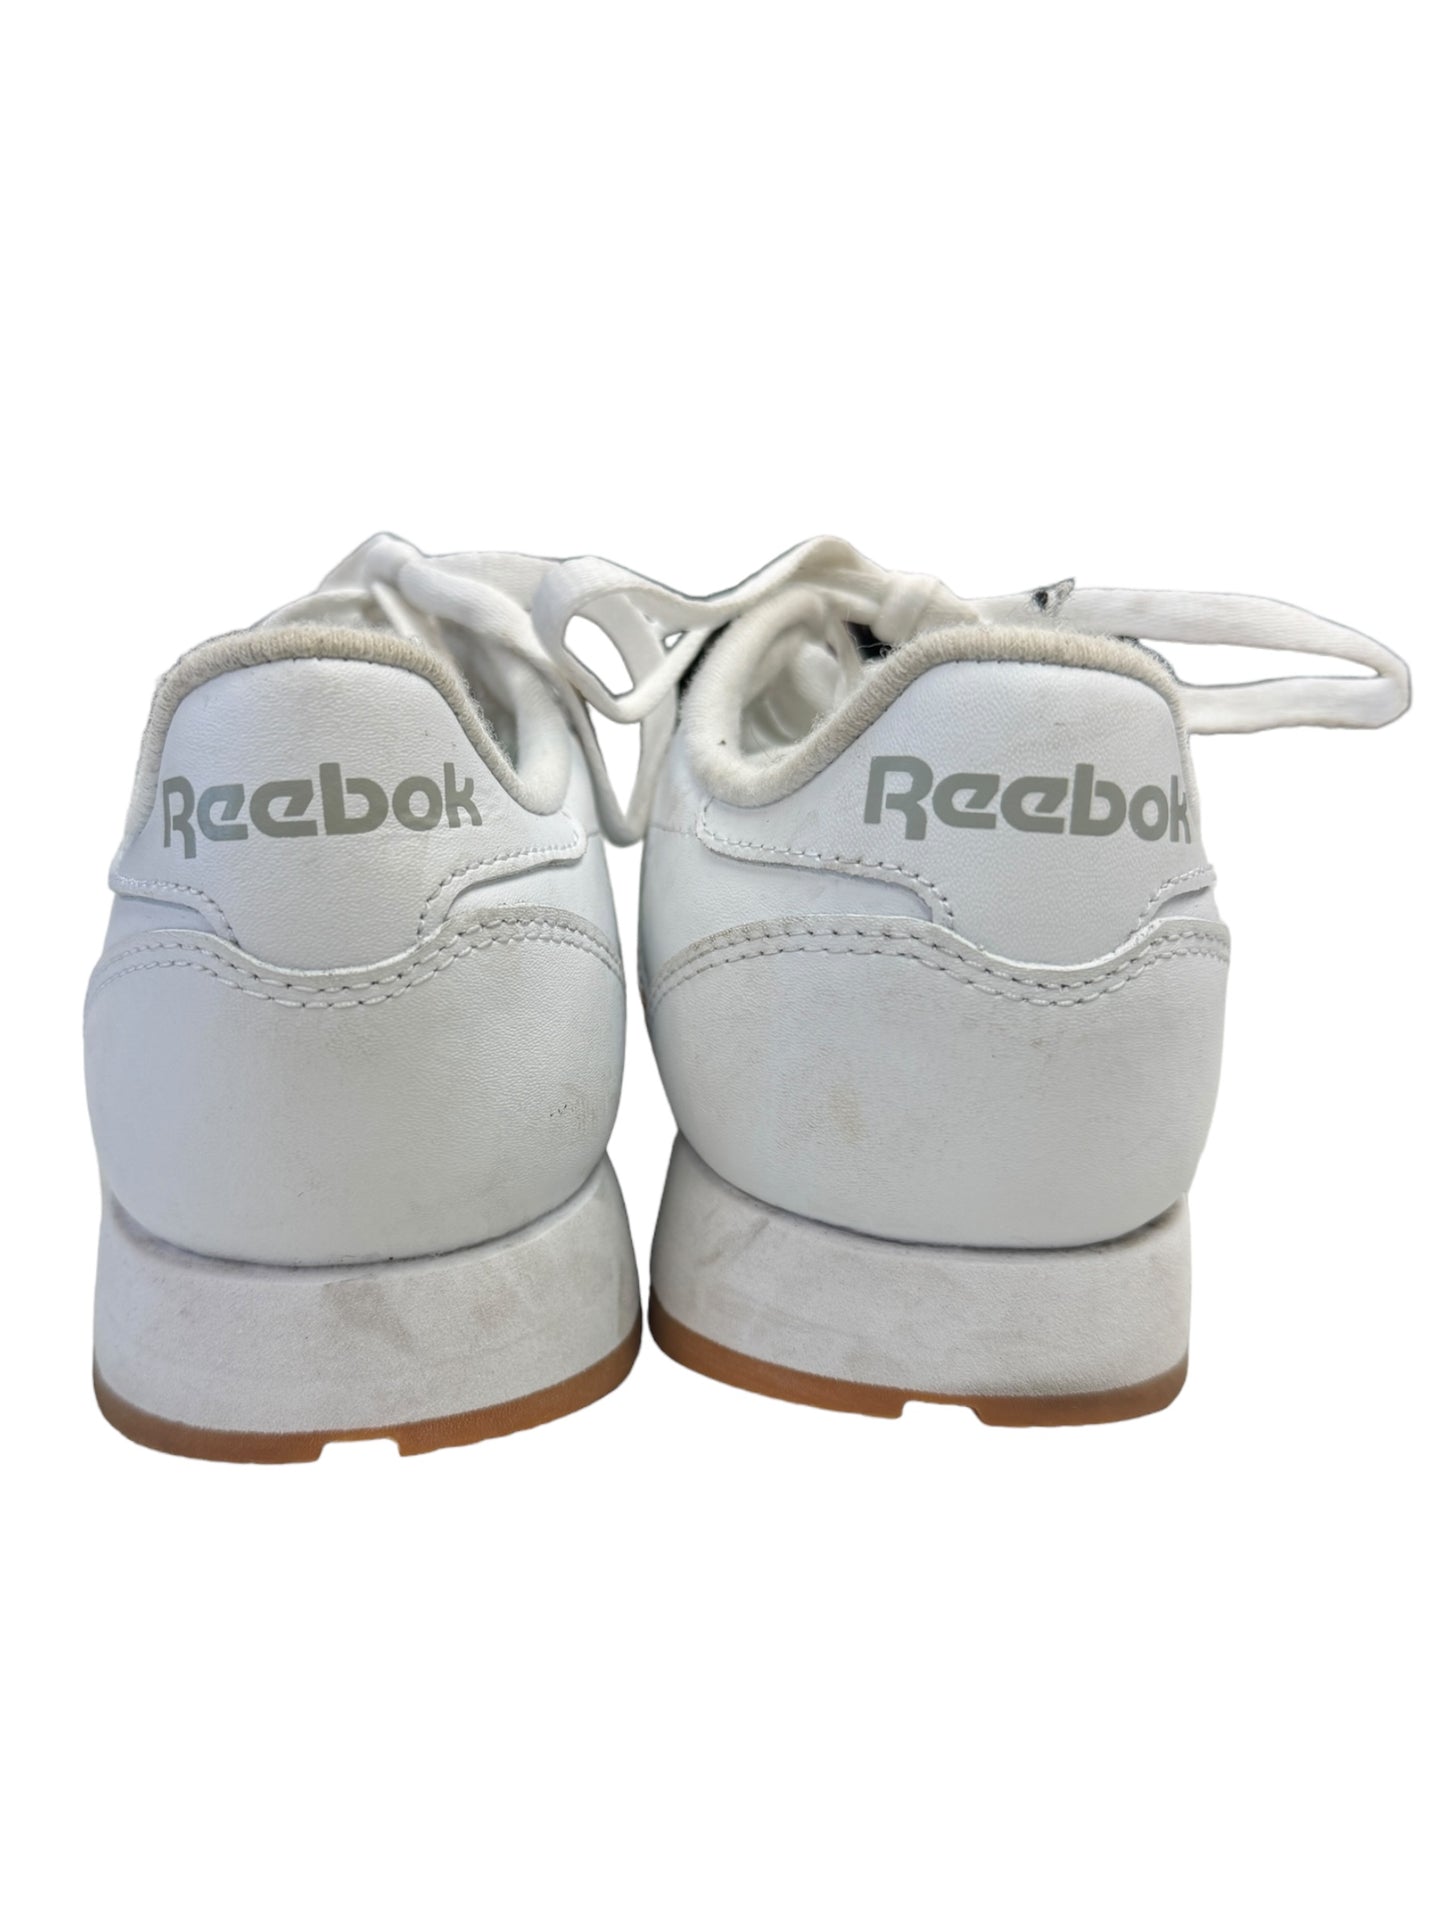 Shoes Sneakers By Reebok  Size: 8.5